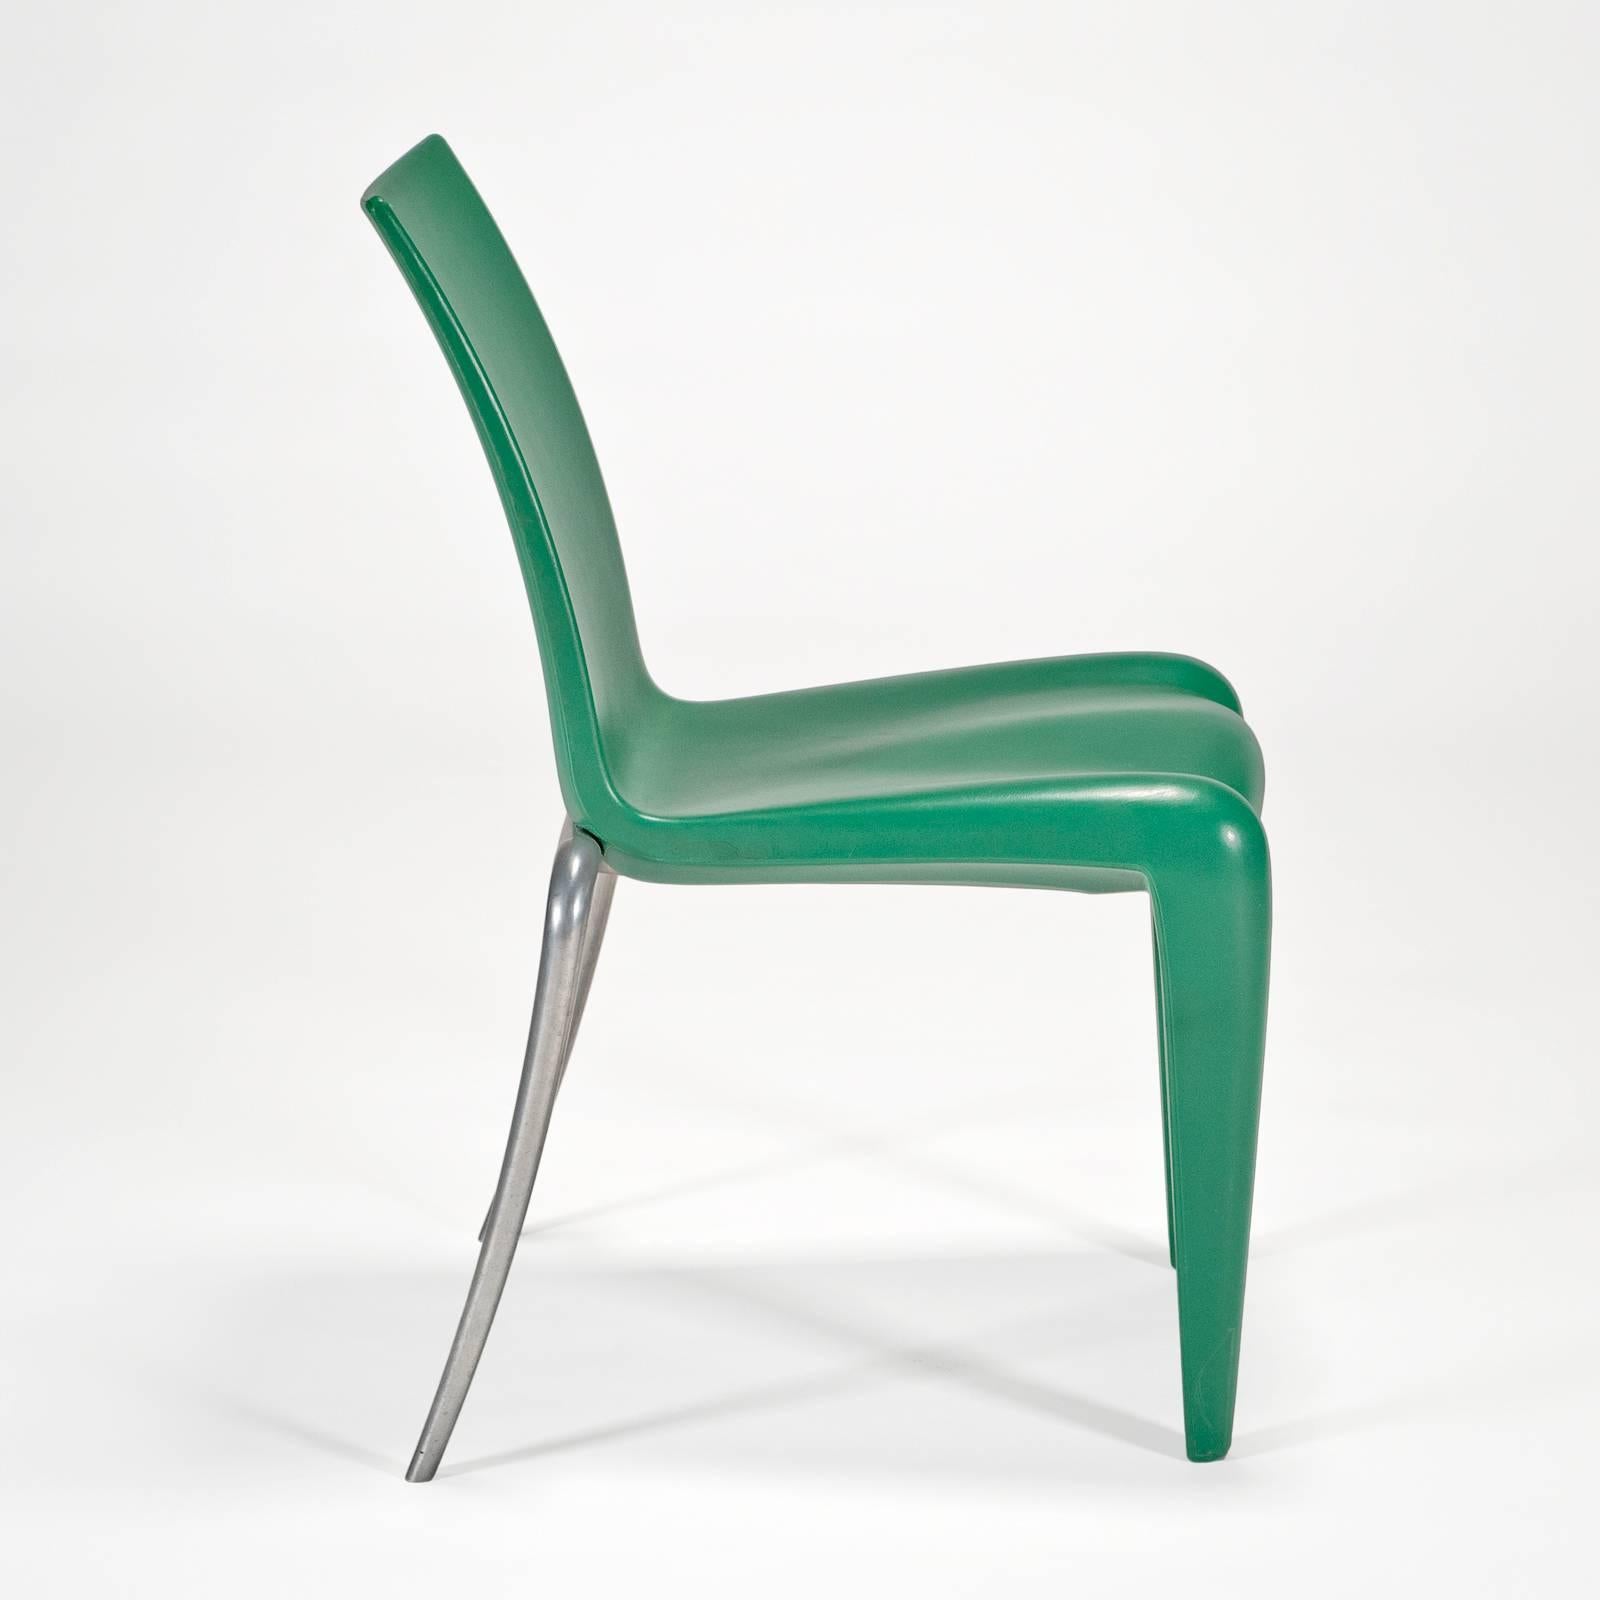 Designed in 1991, this version is an early production prototype, sent to the US as a sales sample. On the bottom of the chair, production versions have incised in the metal 